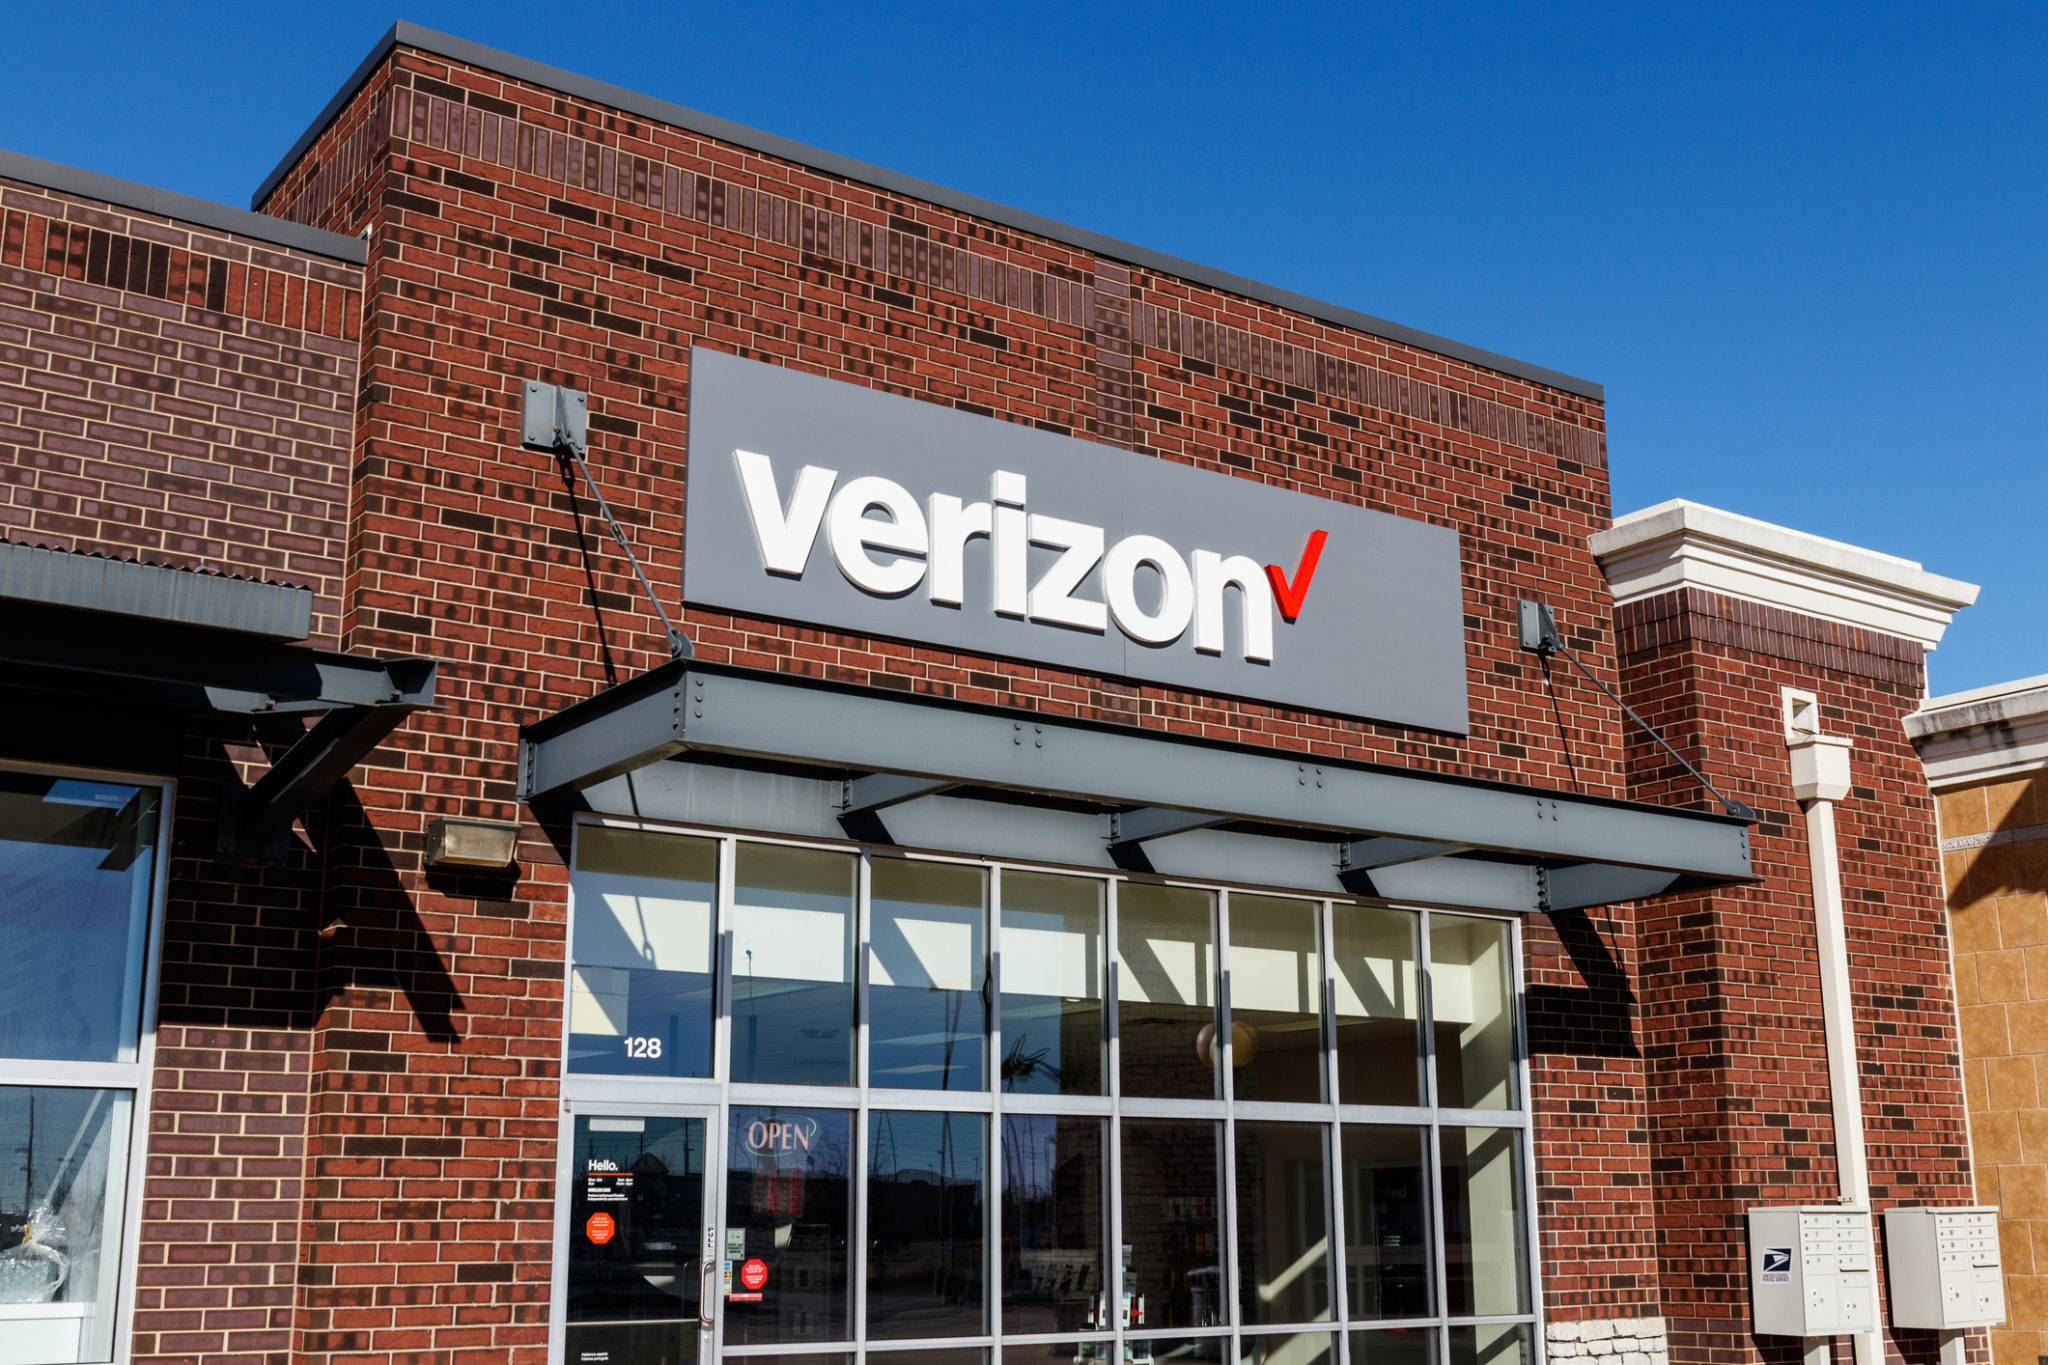 Everything We Know About Verizon 5G Home Internet in 2024 – Cord Cutting 2.0, Cost, Speeds, Data Caps, Free NFL Sunday Ticket, & More